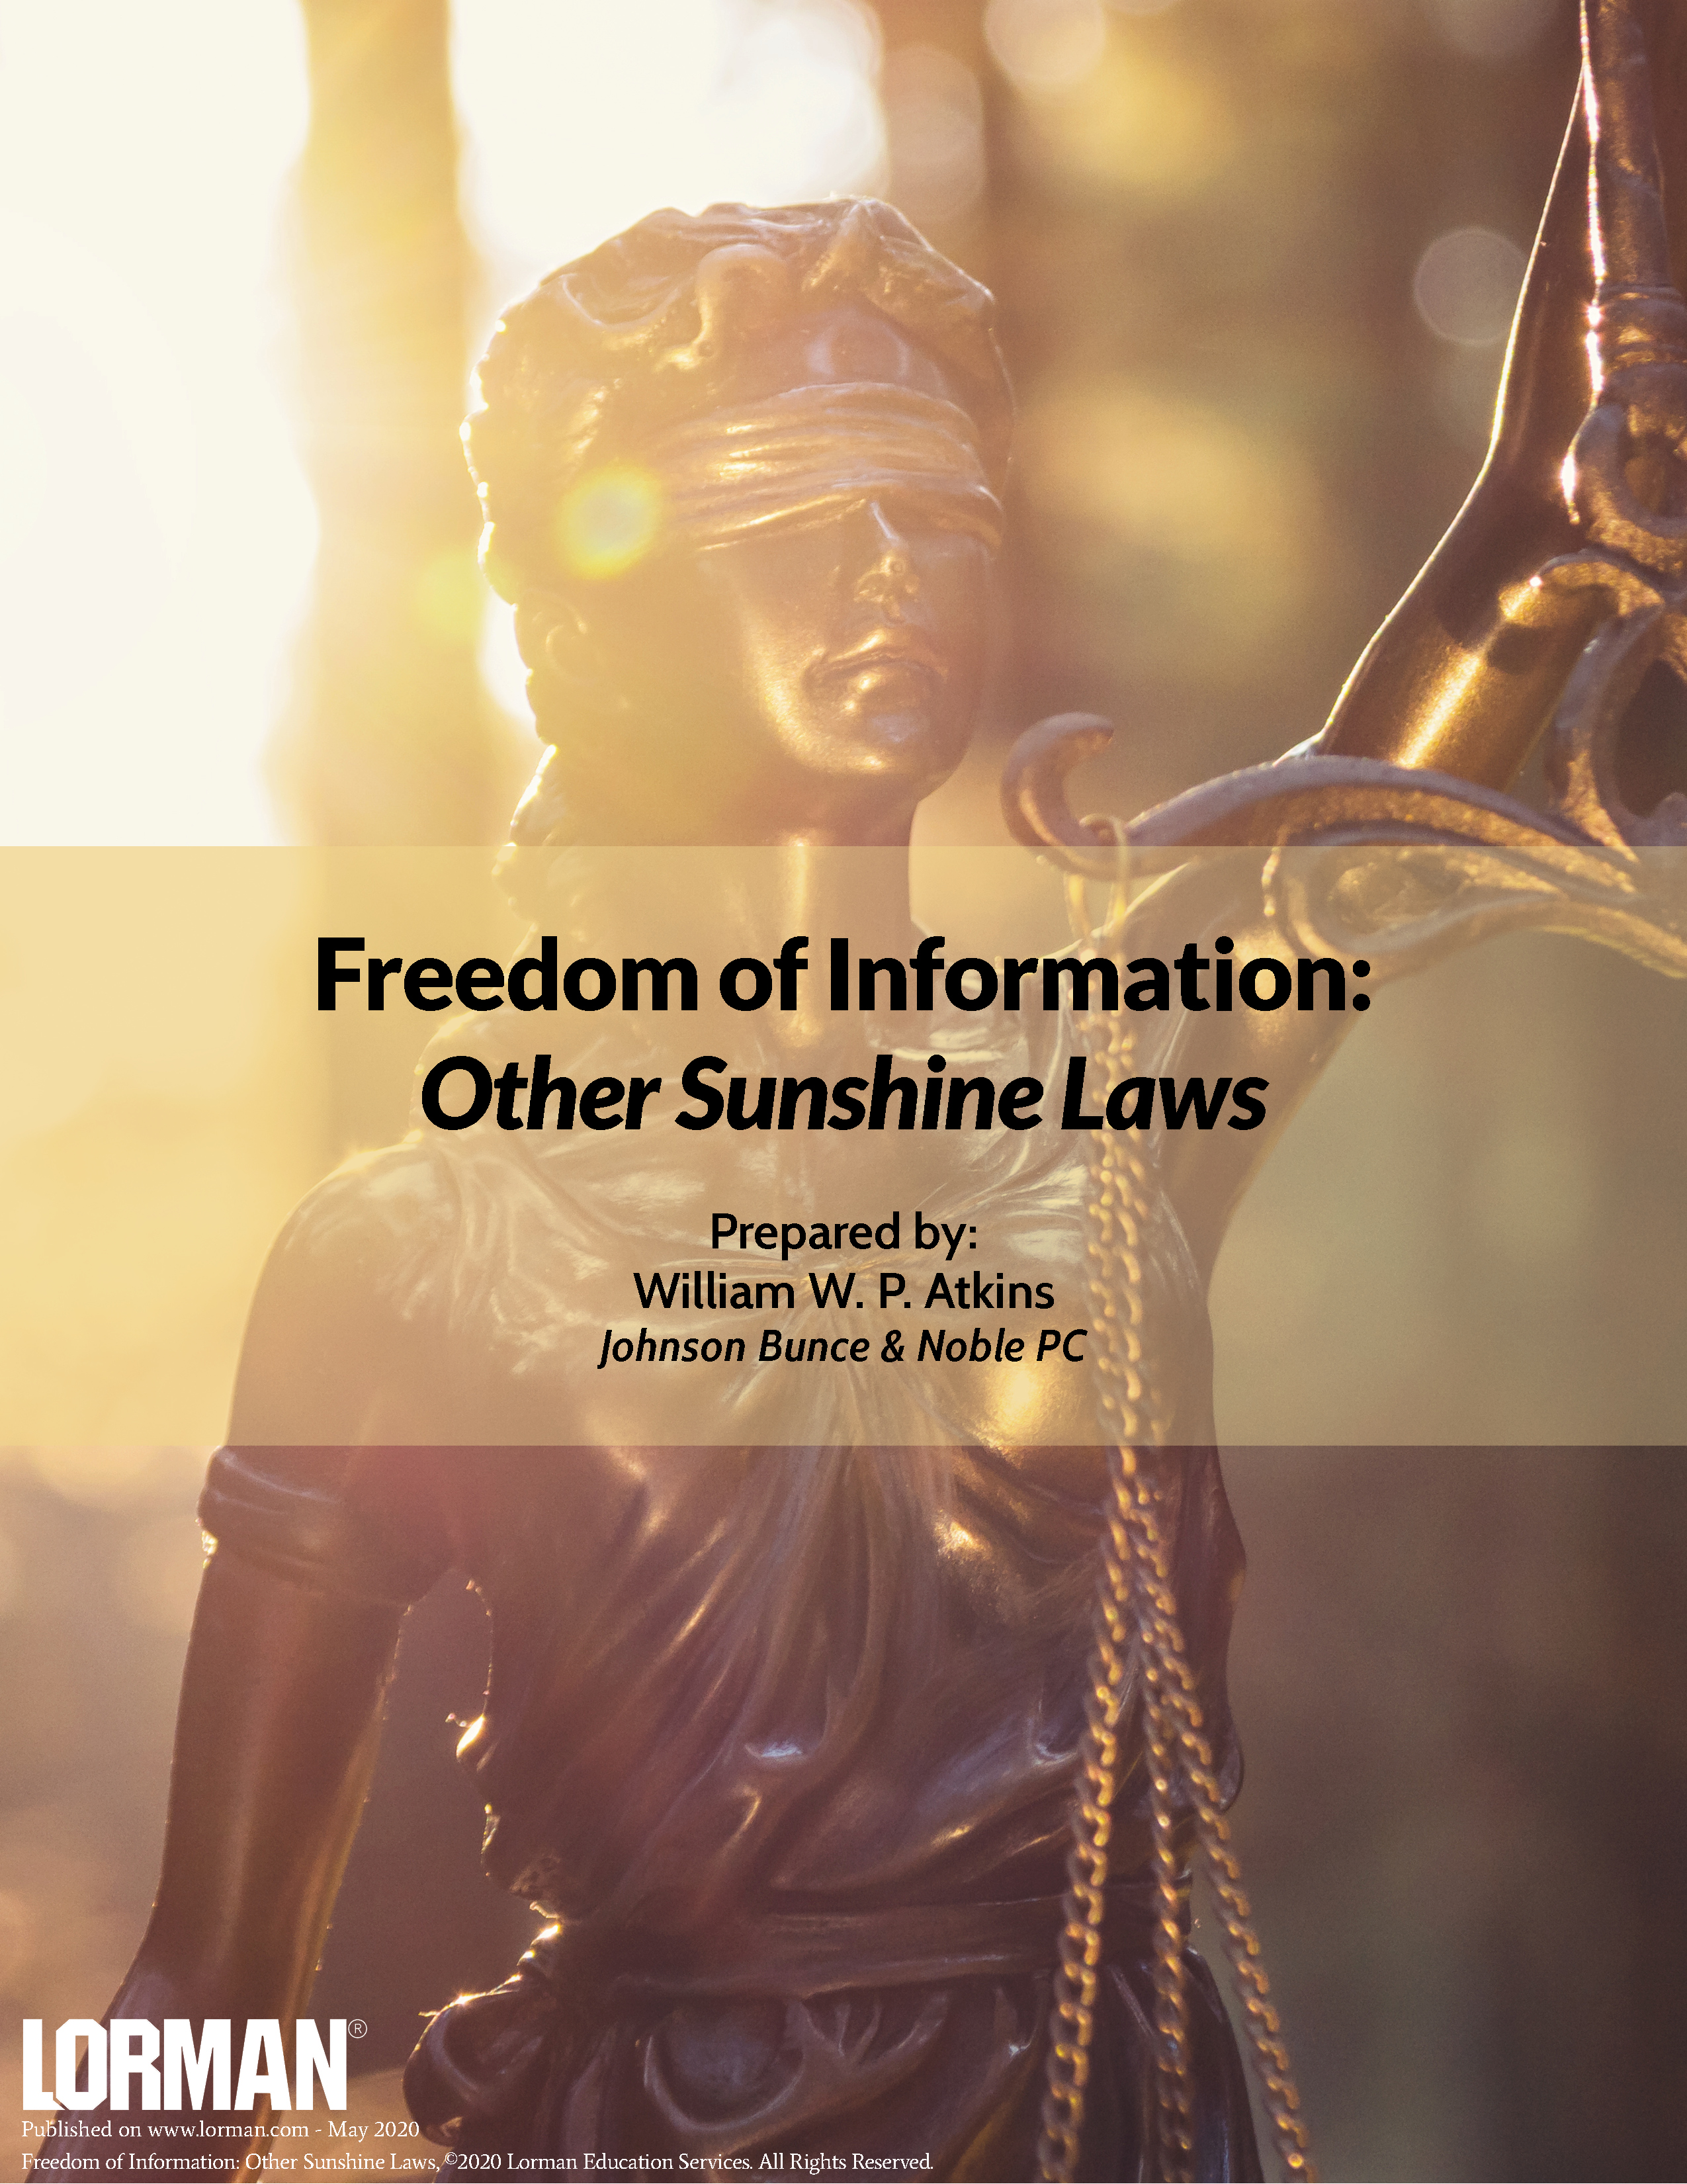 Freedom of Information: Other Sunshine Laws